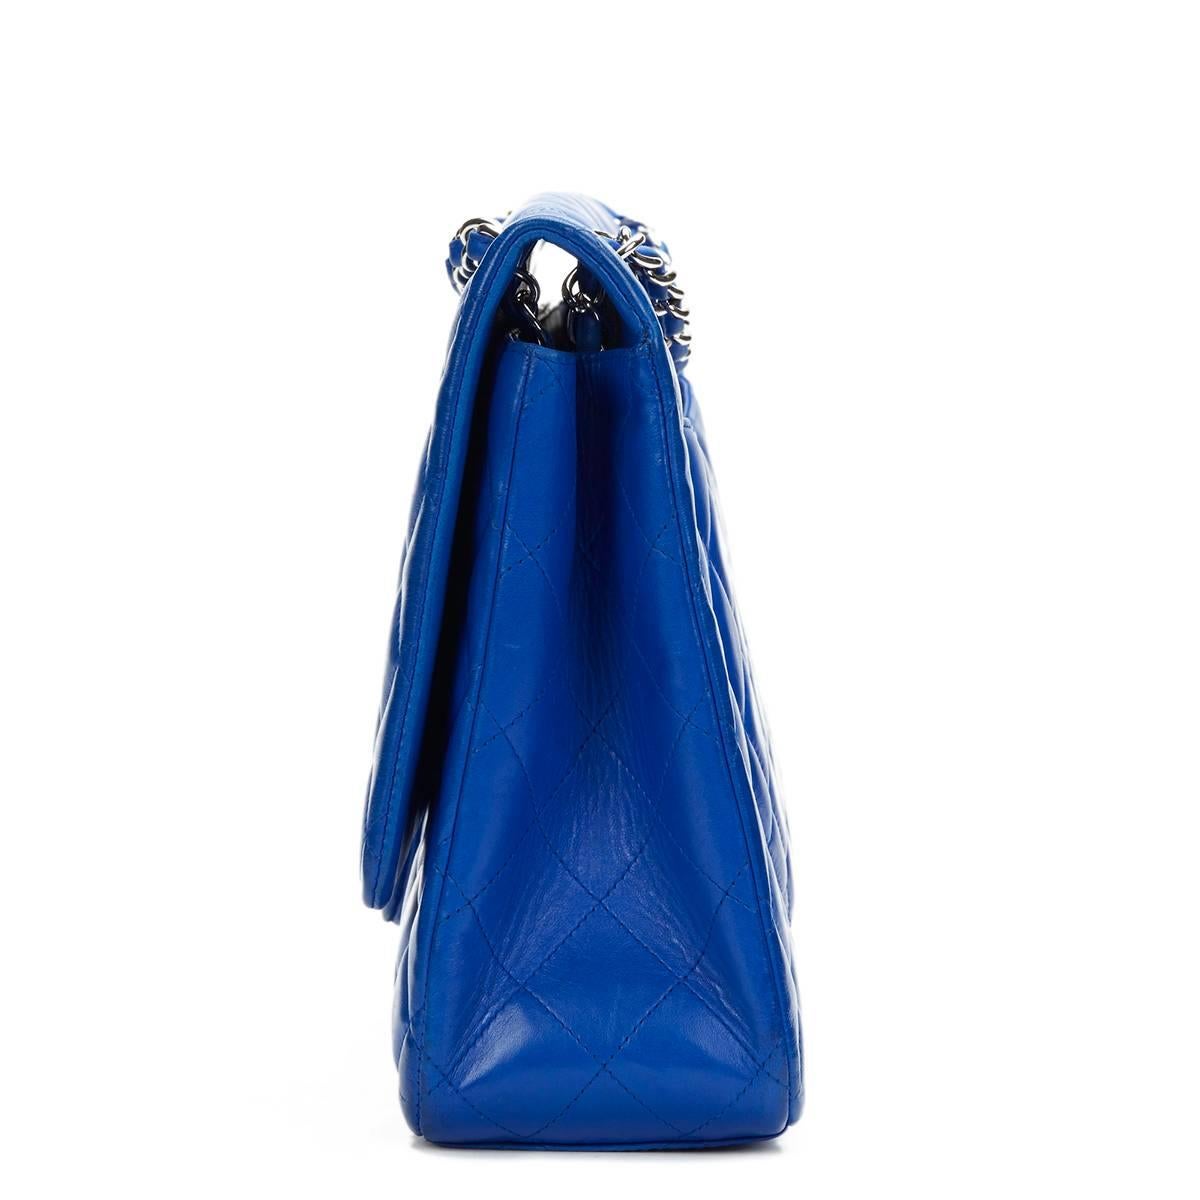 CHANEL
Electric Blue Maxi Classic Single Flap Bag

This CHANEL Classic Single Flap Bag is in Very Good Pre-Owned Condition accompanied by Chanel Dust Bag, Authenticity Card. Circa 2009. Primarily made from Lambskin Leather complimented by Silver